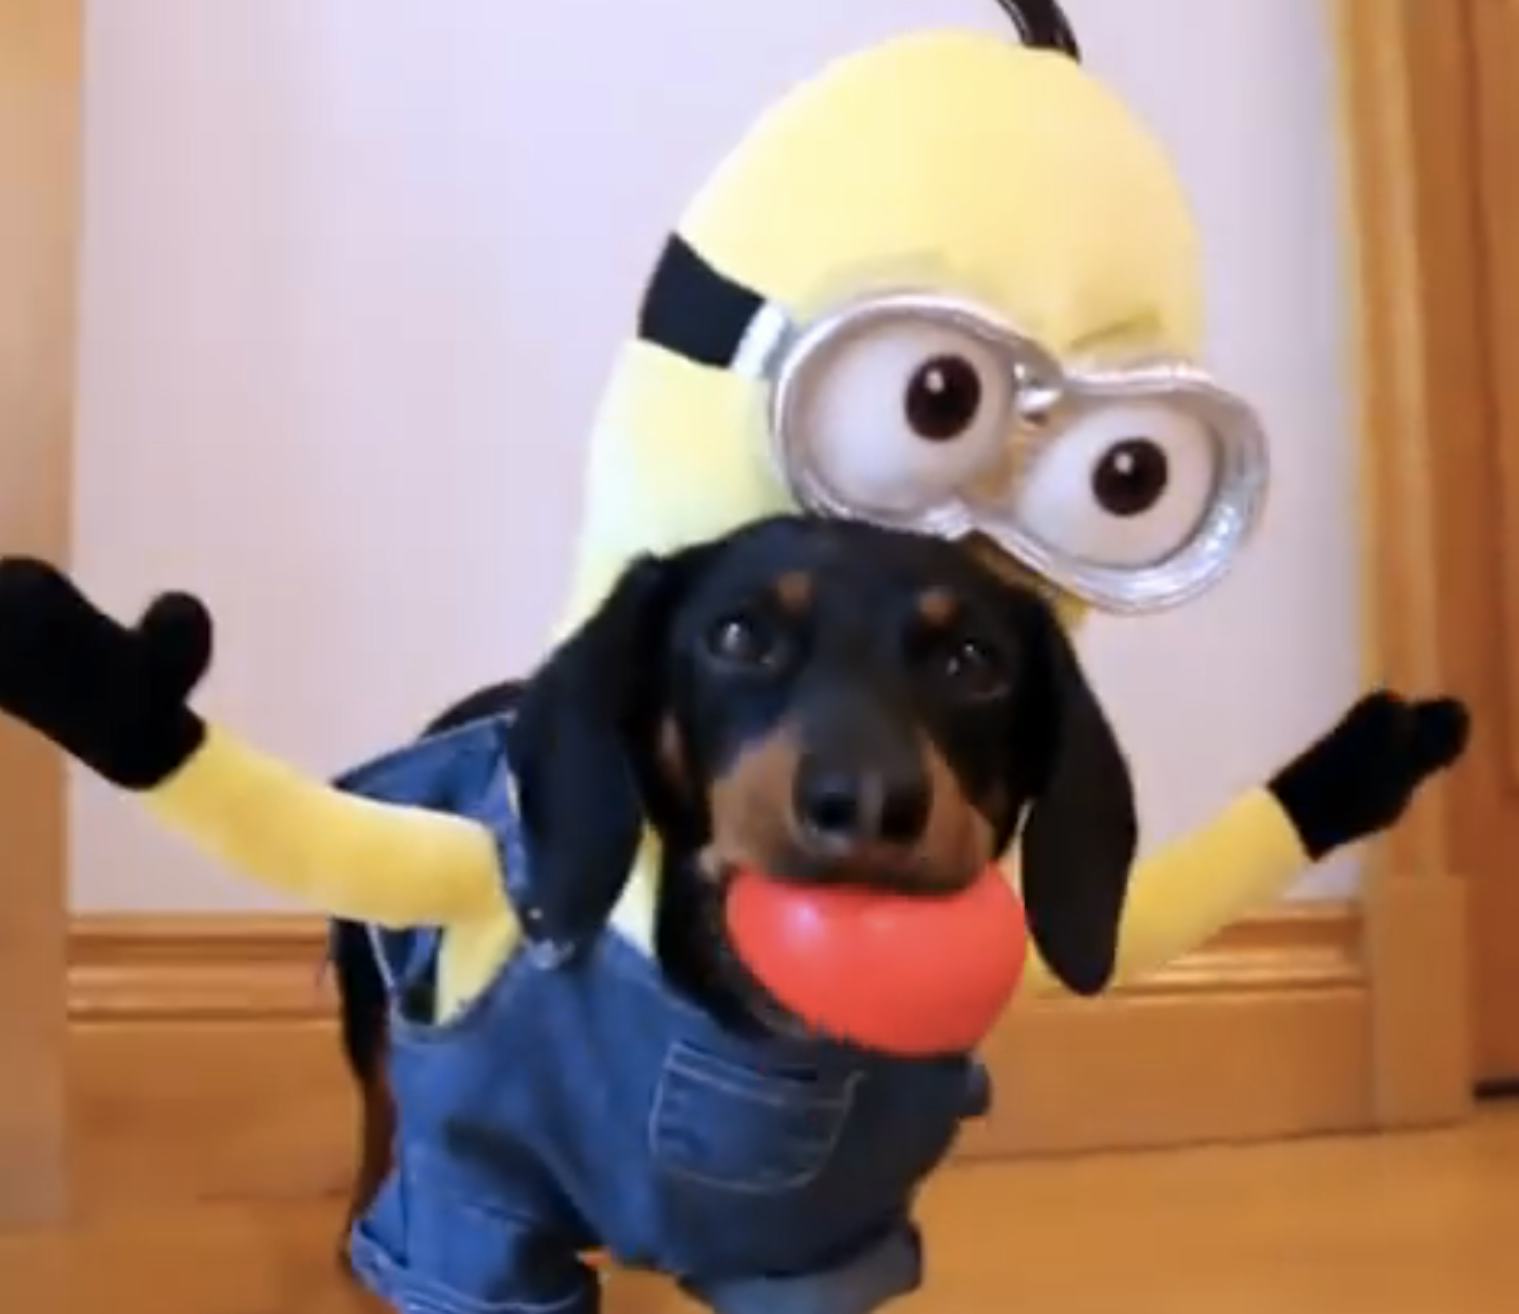 Watch These Dogs In Minion Costumes Shake Their Adorable Tails Off — VIDEO